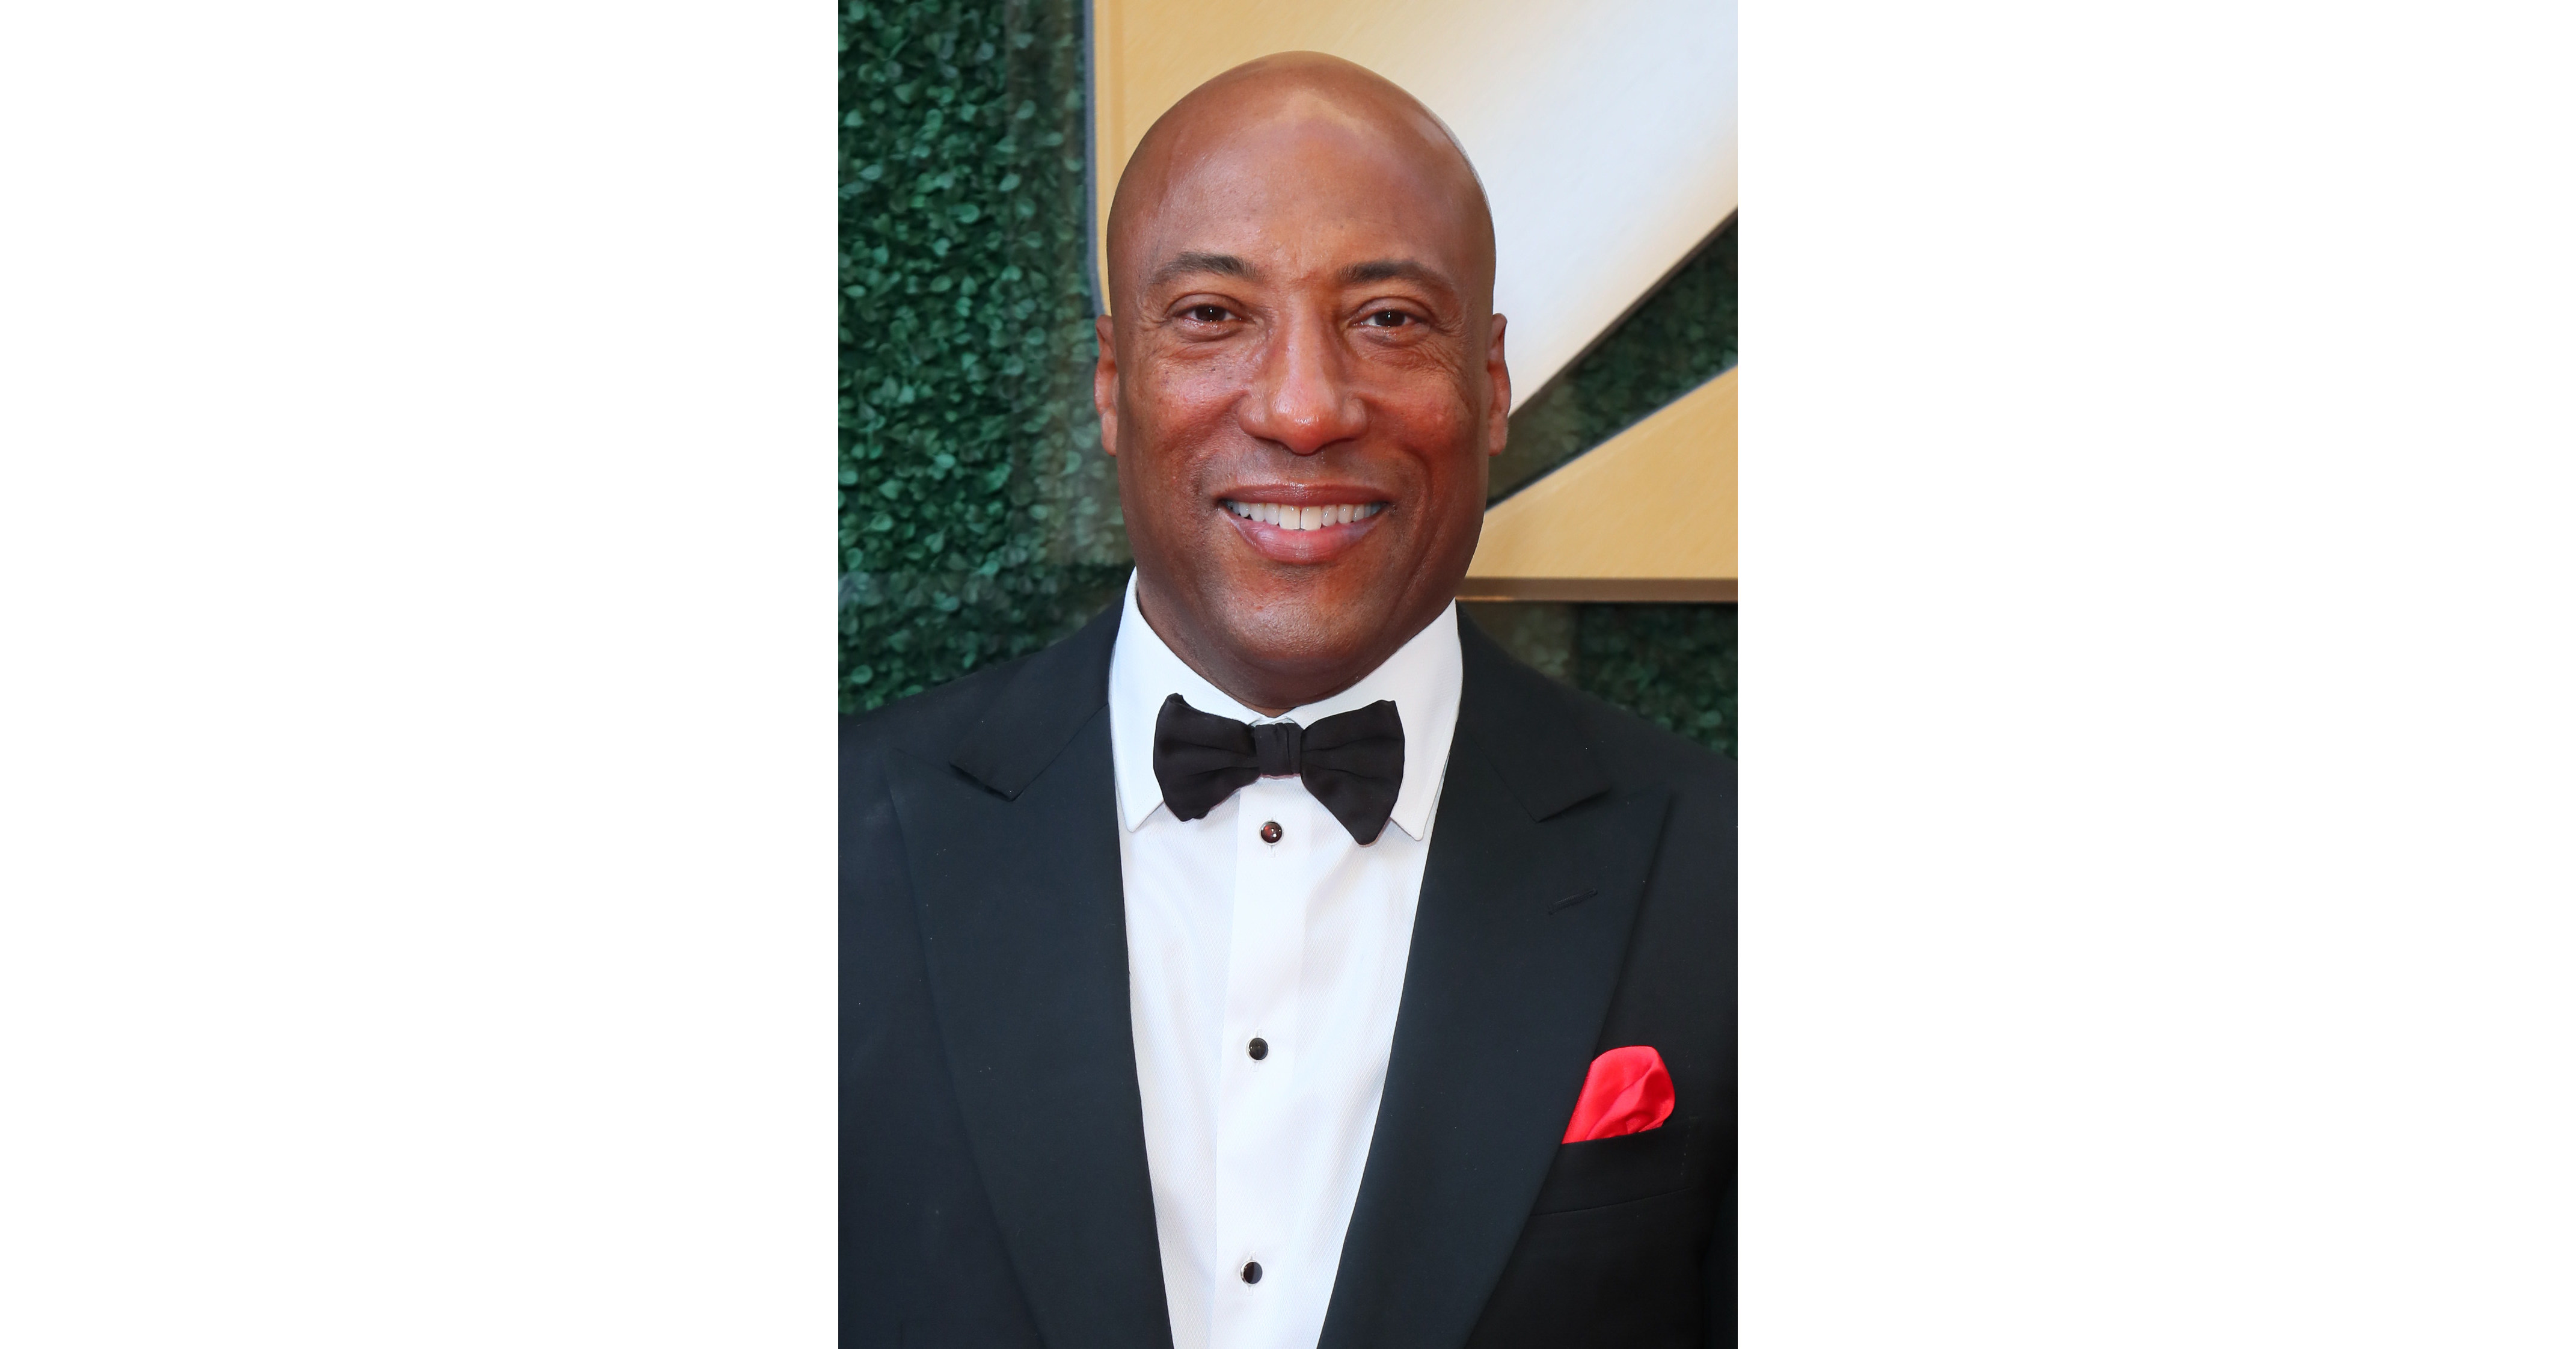 BYRON ALLEN'S ALLEN MEDIA GROUP ANNOUNCES INAUGURAL 'THE GRIO AWARDS' CELEBRATING ICONS, LEADERS AND LEGENDS